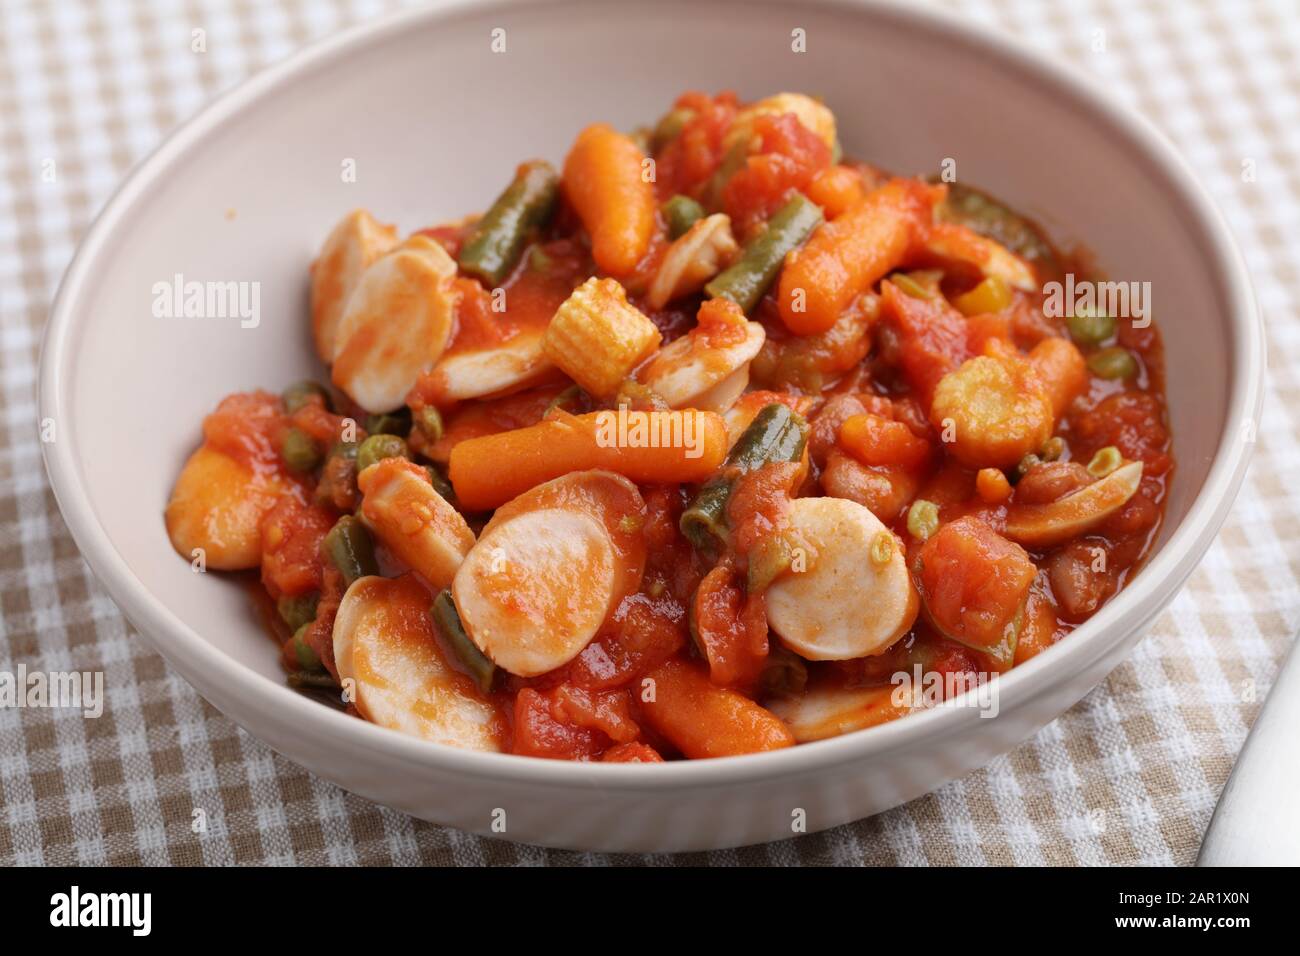 Chicken sausage and vegetable ragout with carrot, corn, green bean, pepper, green pea, and tomato sauce Stock Photo